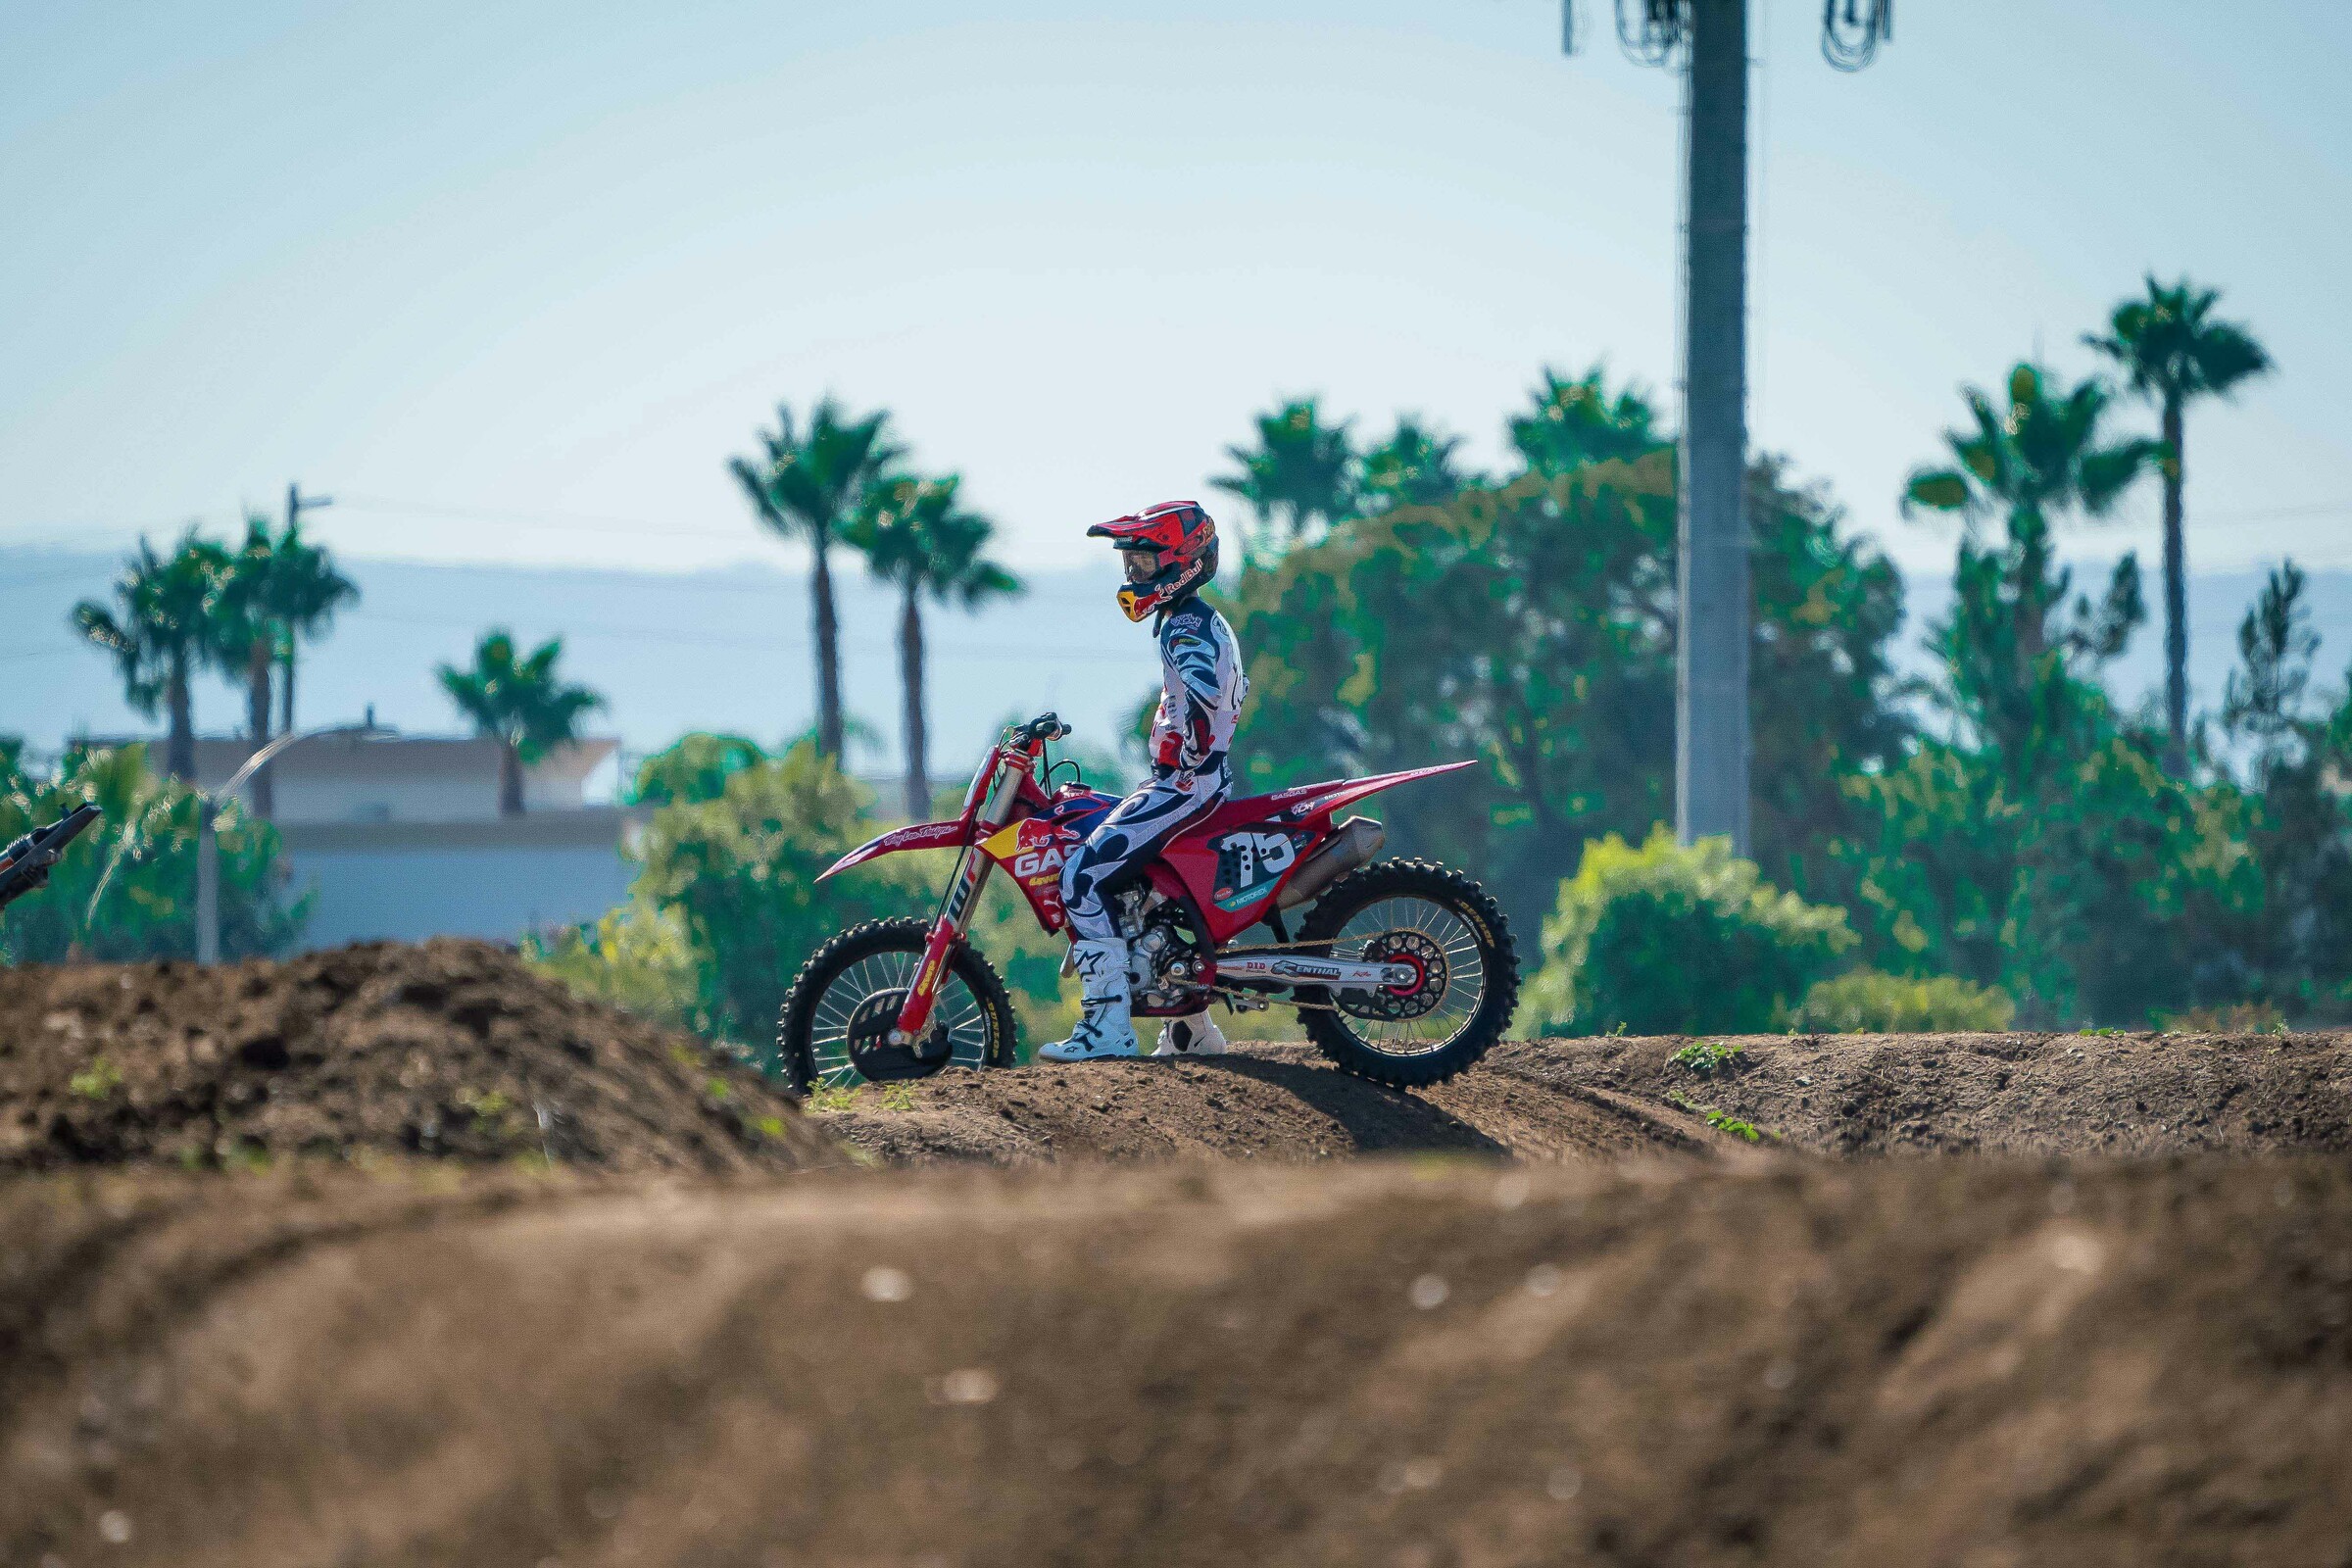 Motocross Races Conclude Motor Sports Events at Fair, Sports